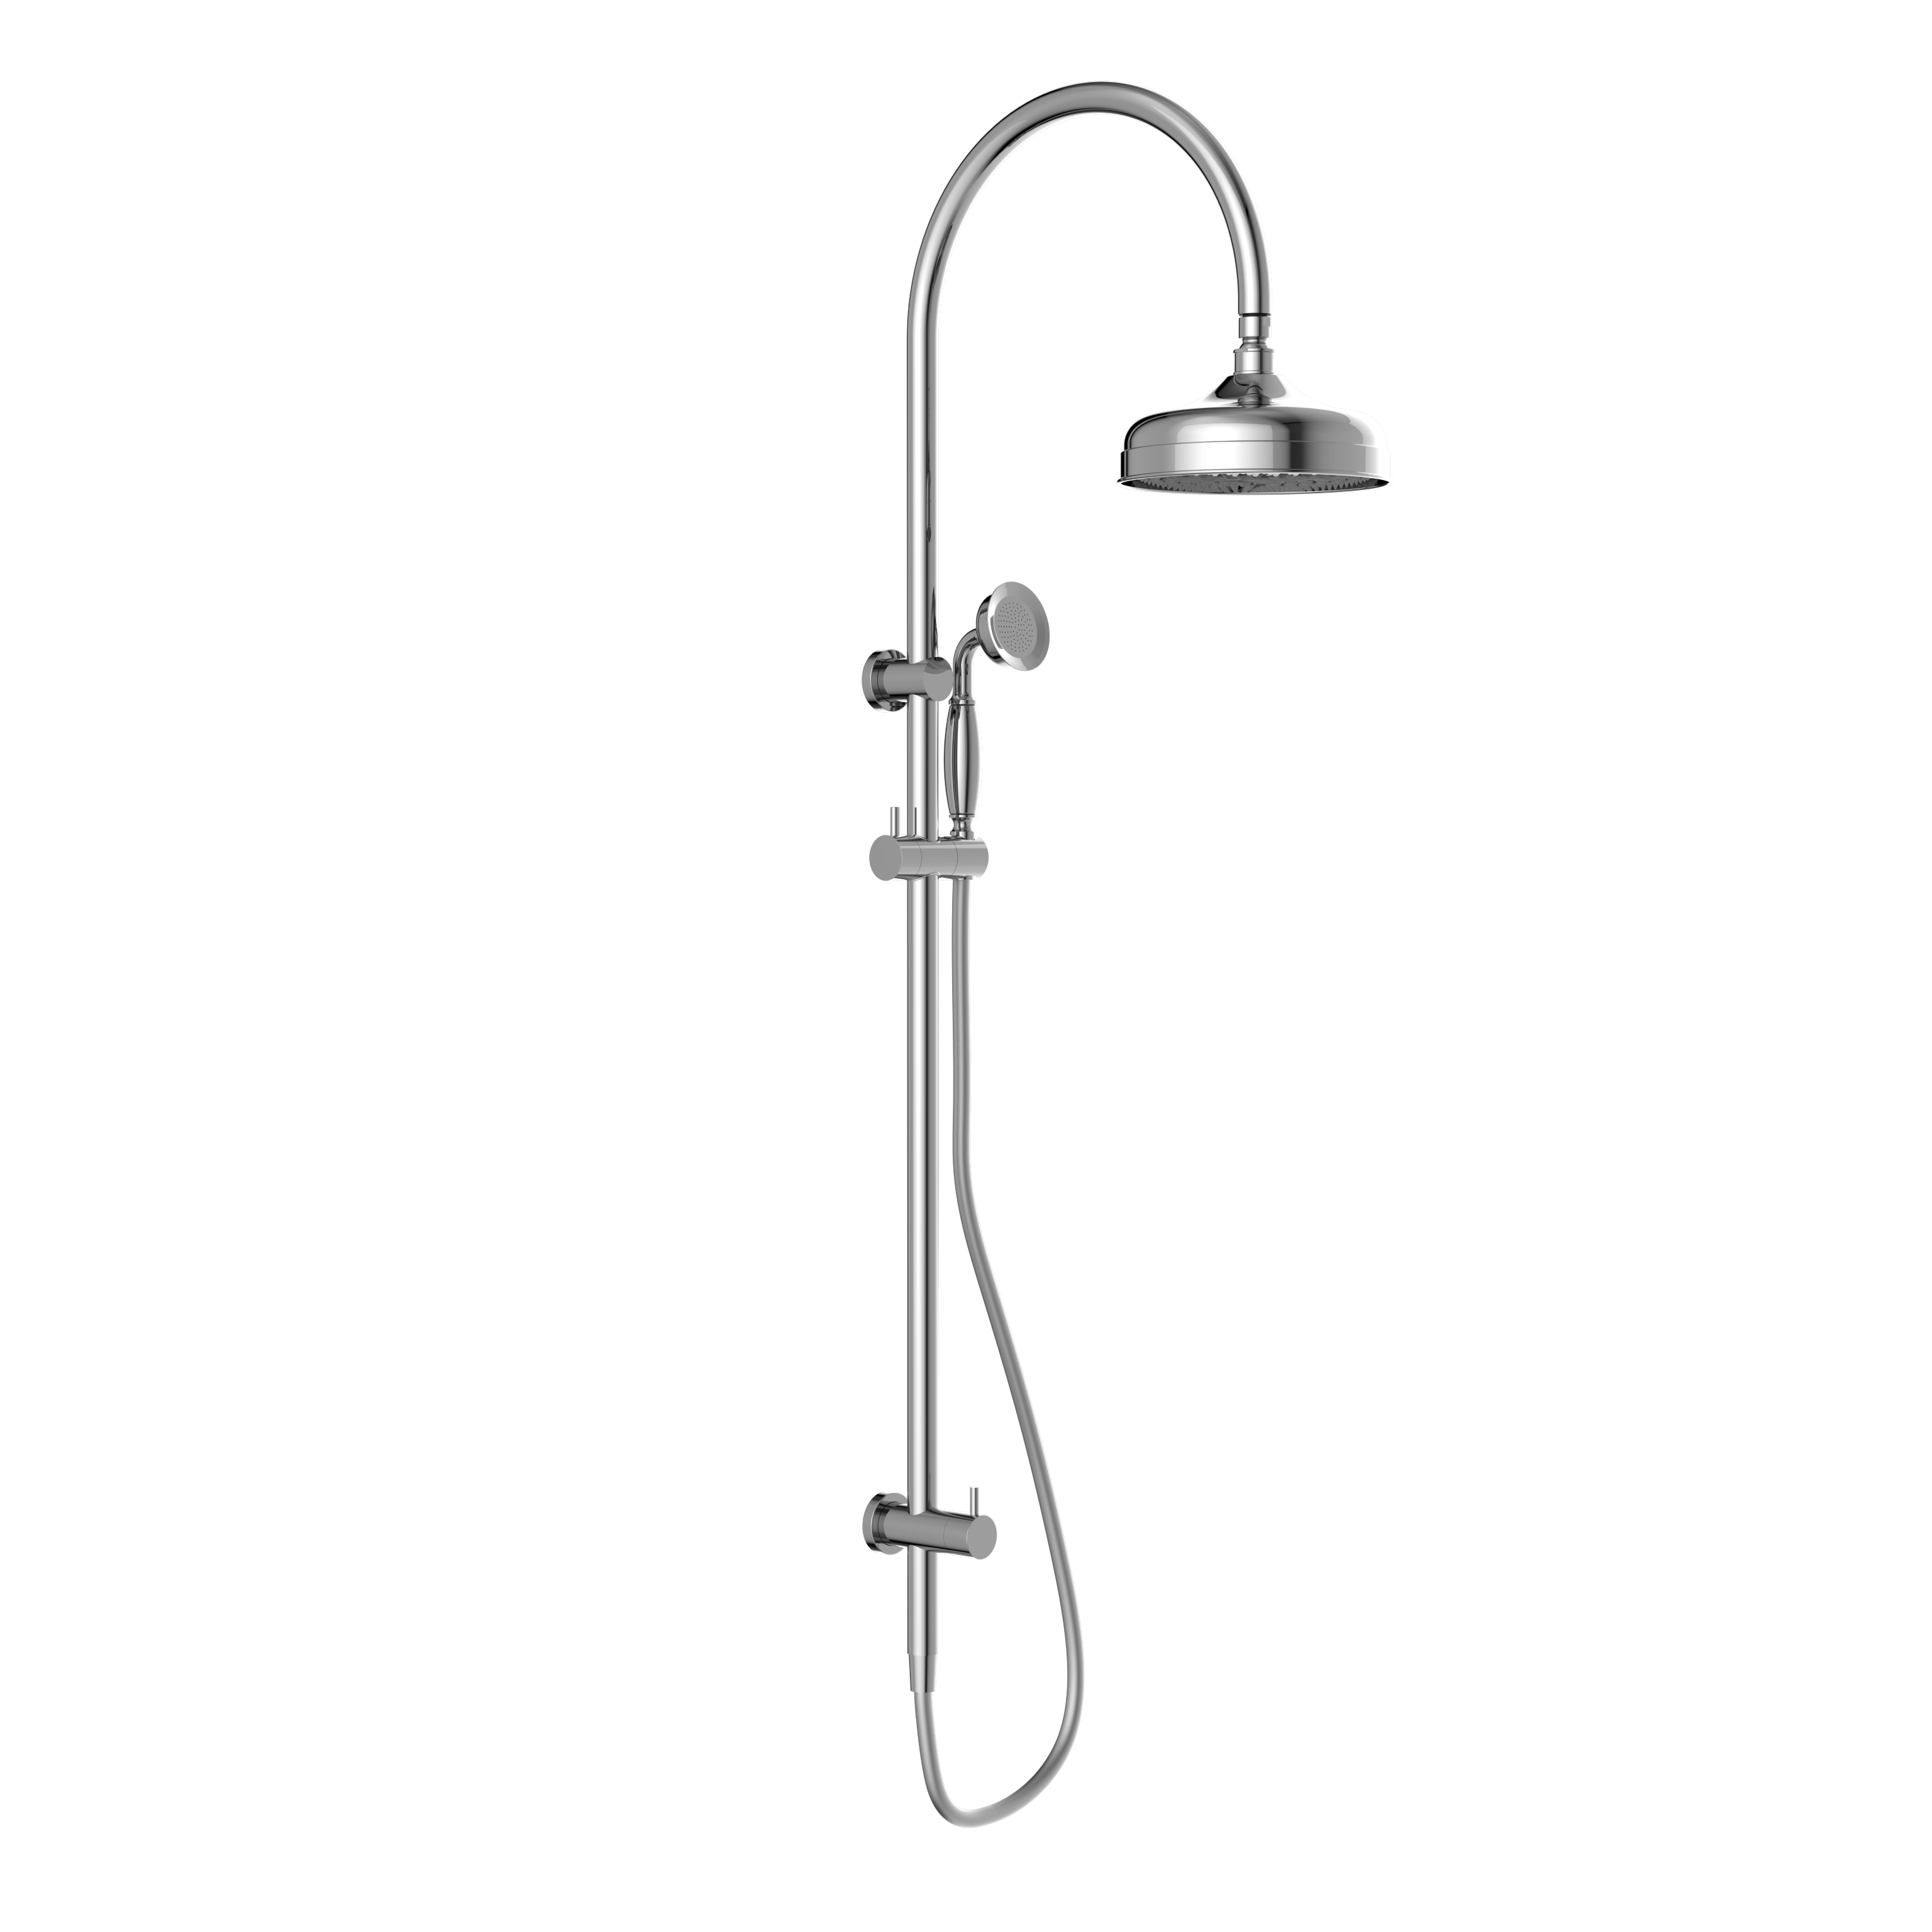 Nero York Twin Shower With Metal Hand Shower Chrome - NR69210502CH